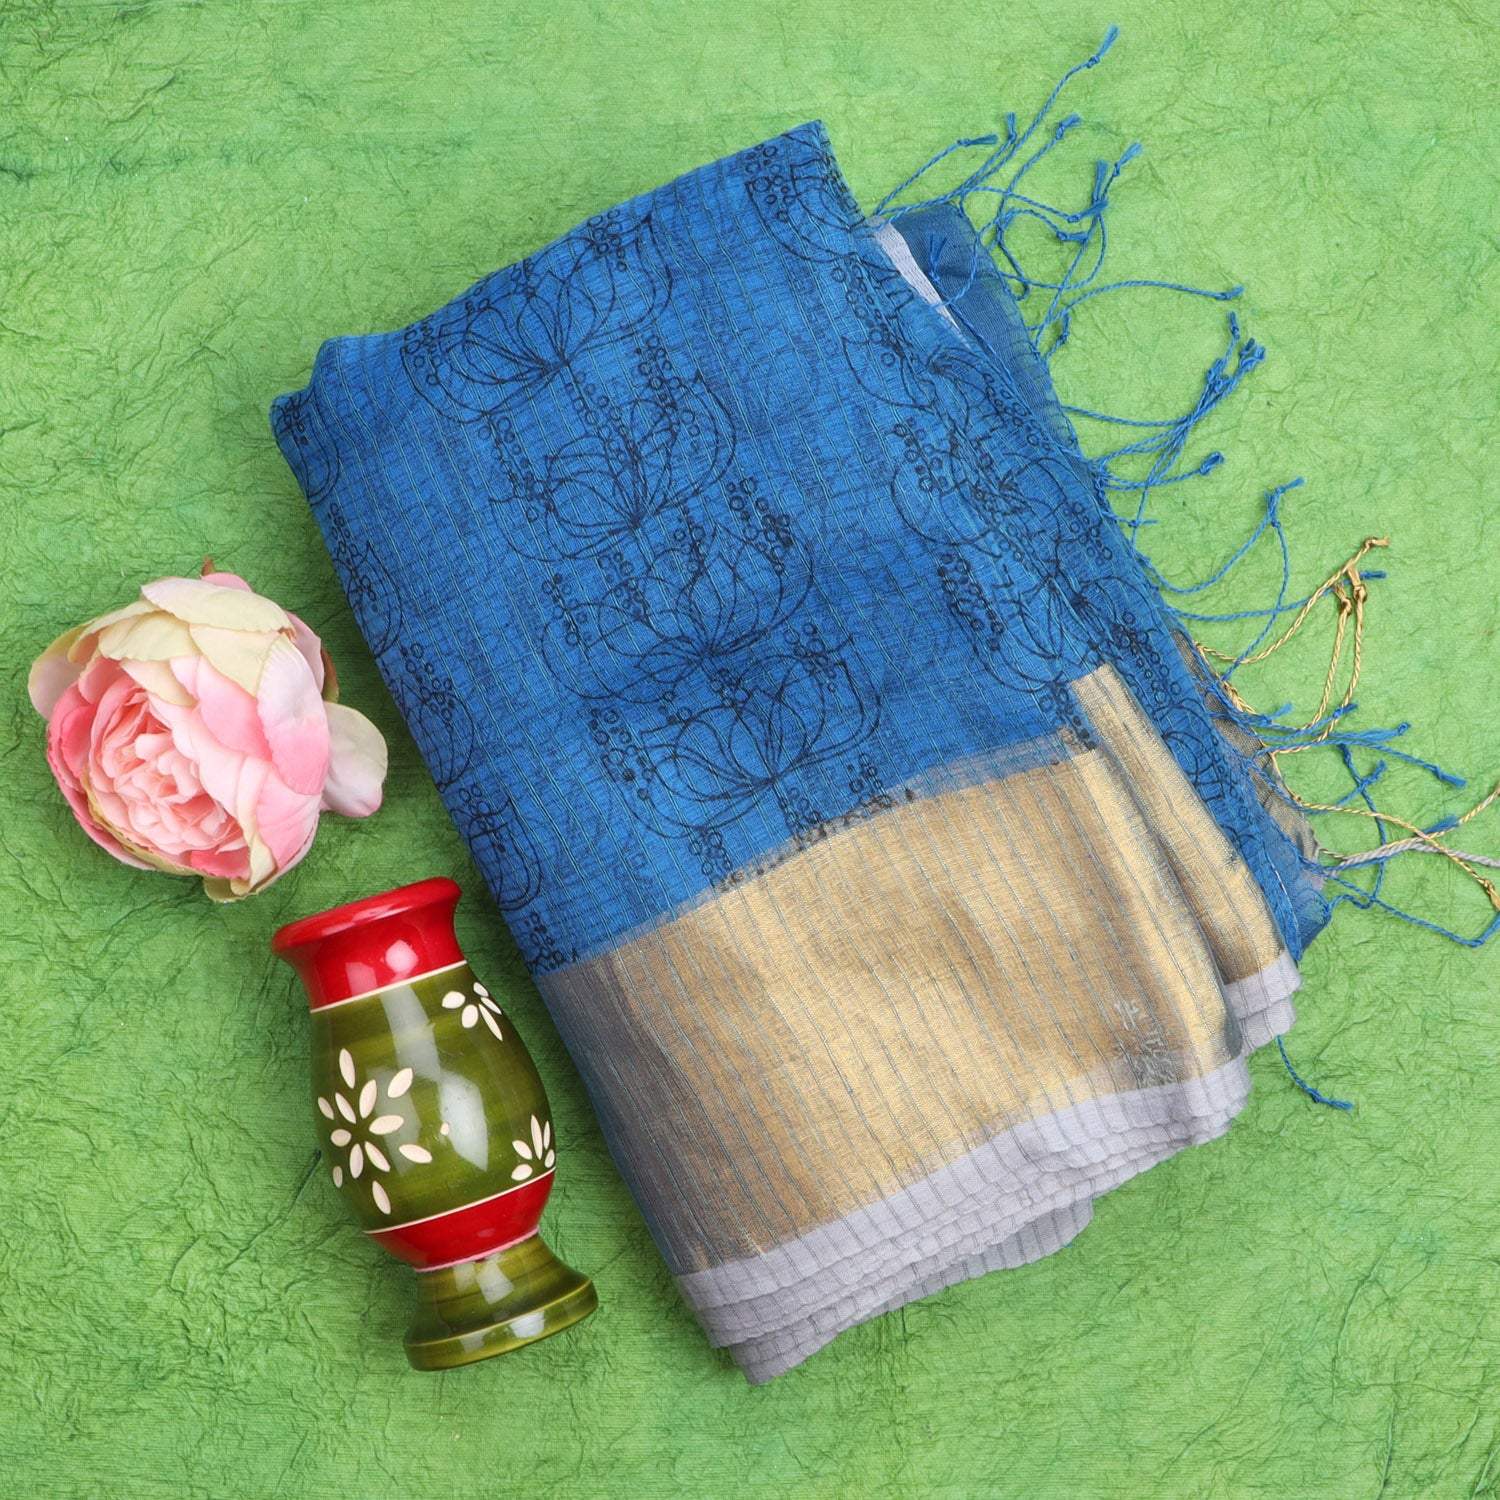 Blue Organza Saree With Floral Prints - Singhania's